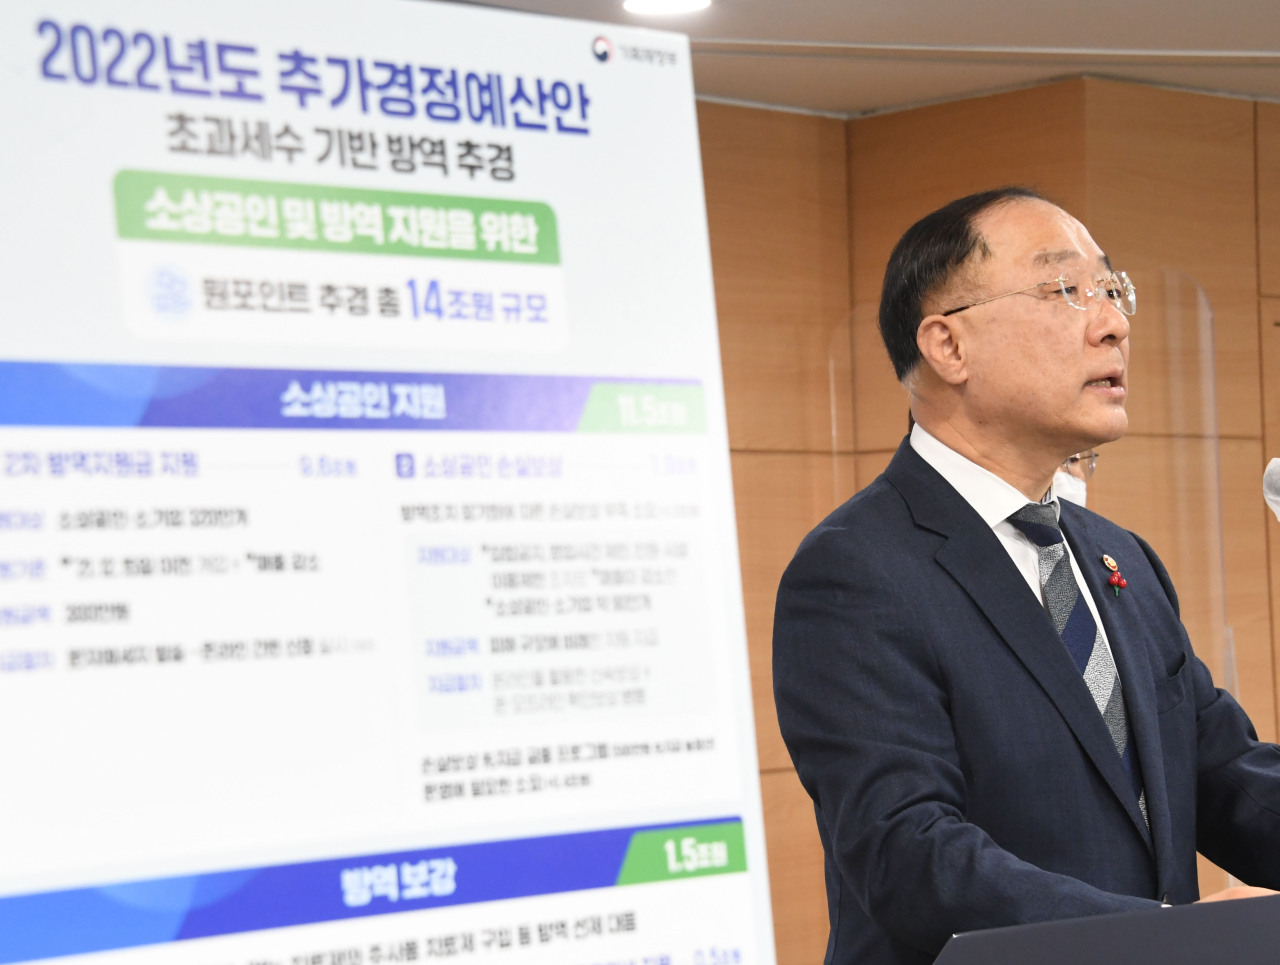 Finance Minister Hong Nam-ki speaks about the supplementary budget bill for microbusiness owners during a news briefing at Government Complex Seoul, Friday. (Yonhap)